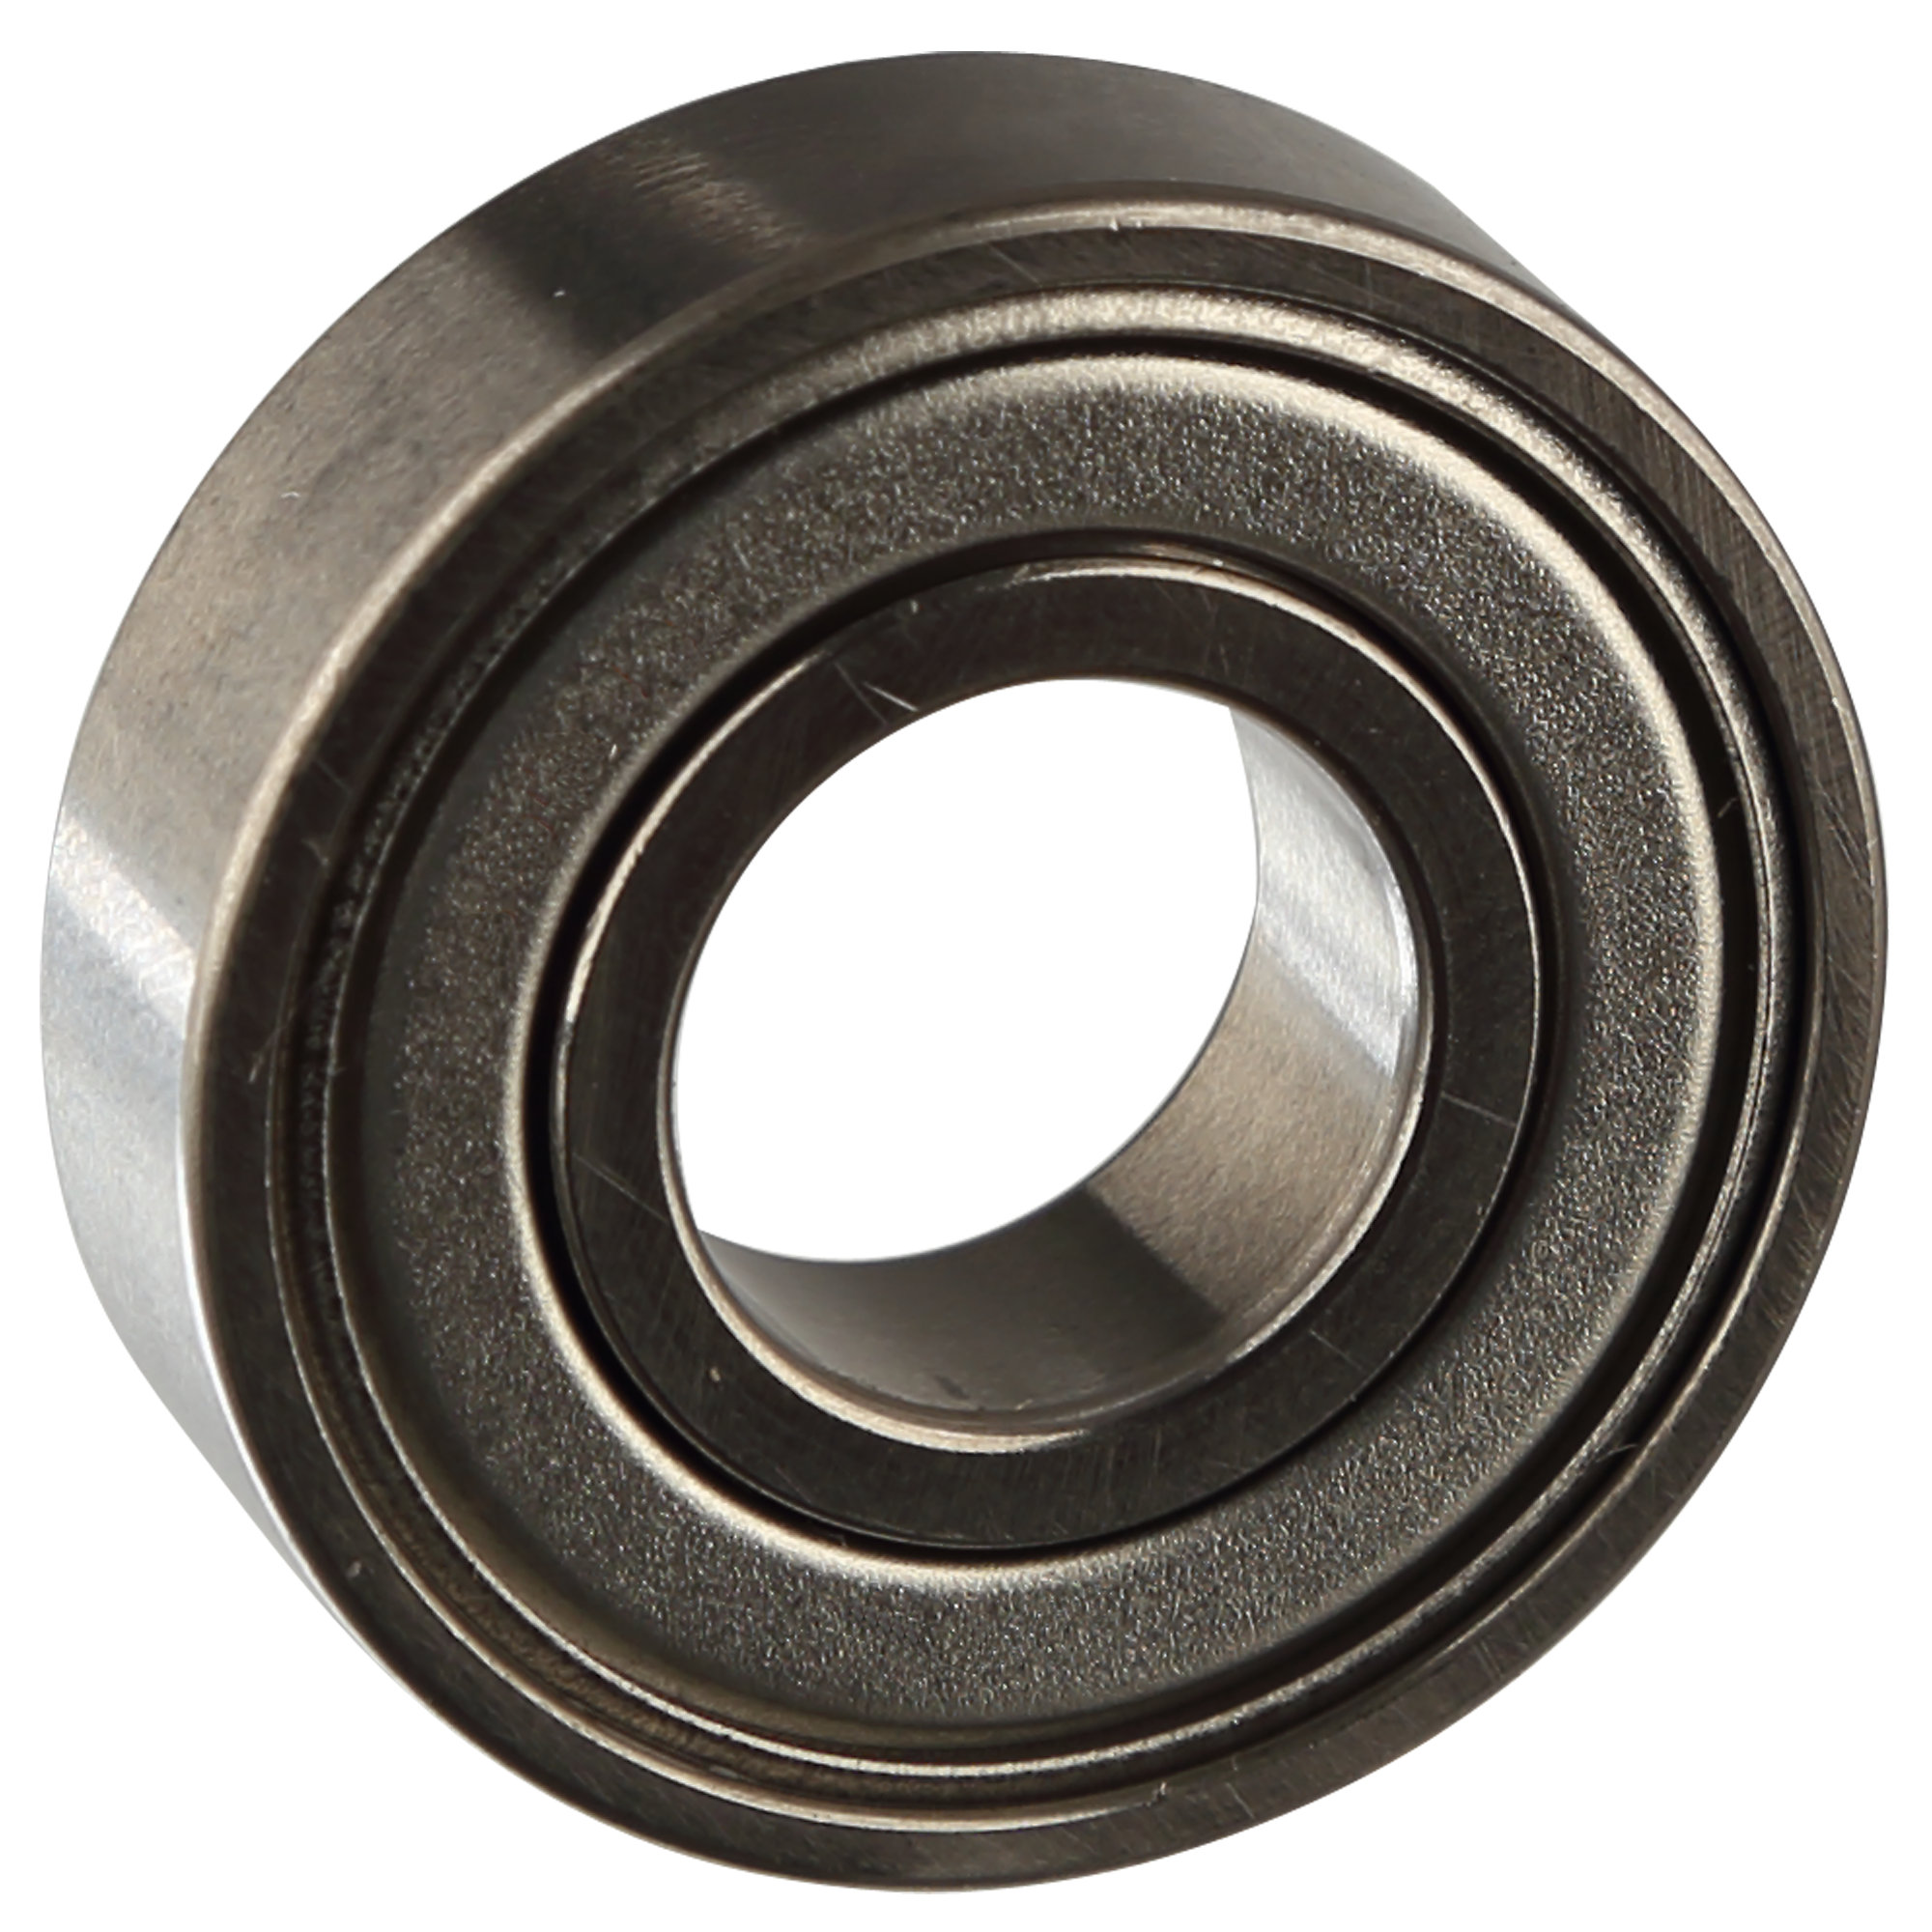 Bearing for Flywheel, 6001-2RS, Star Trac